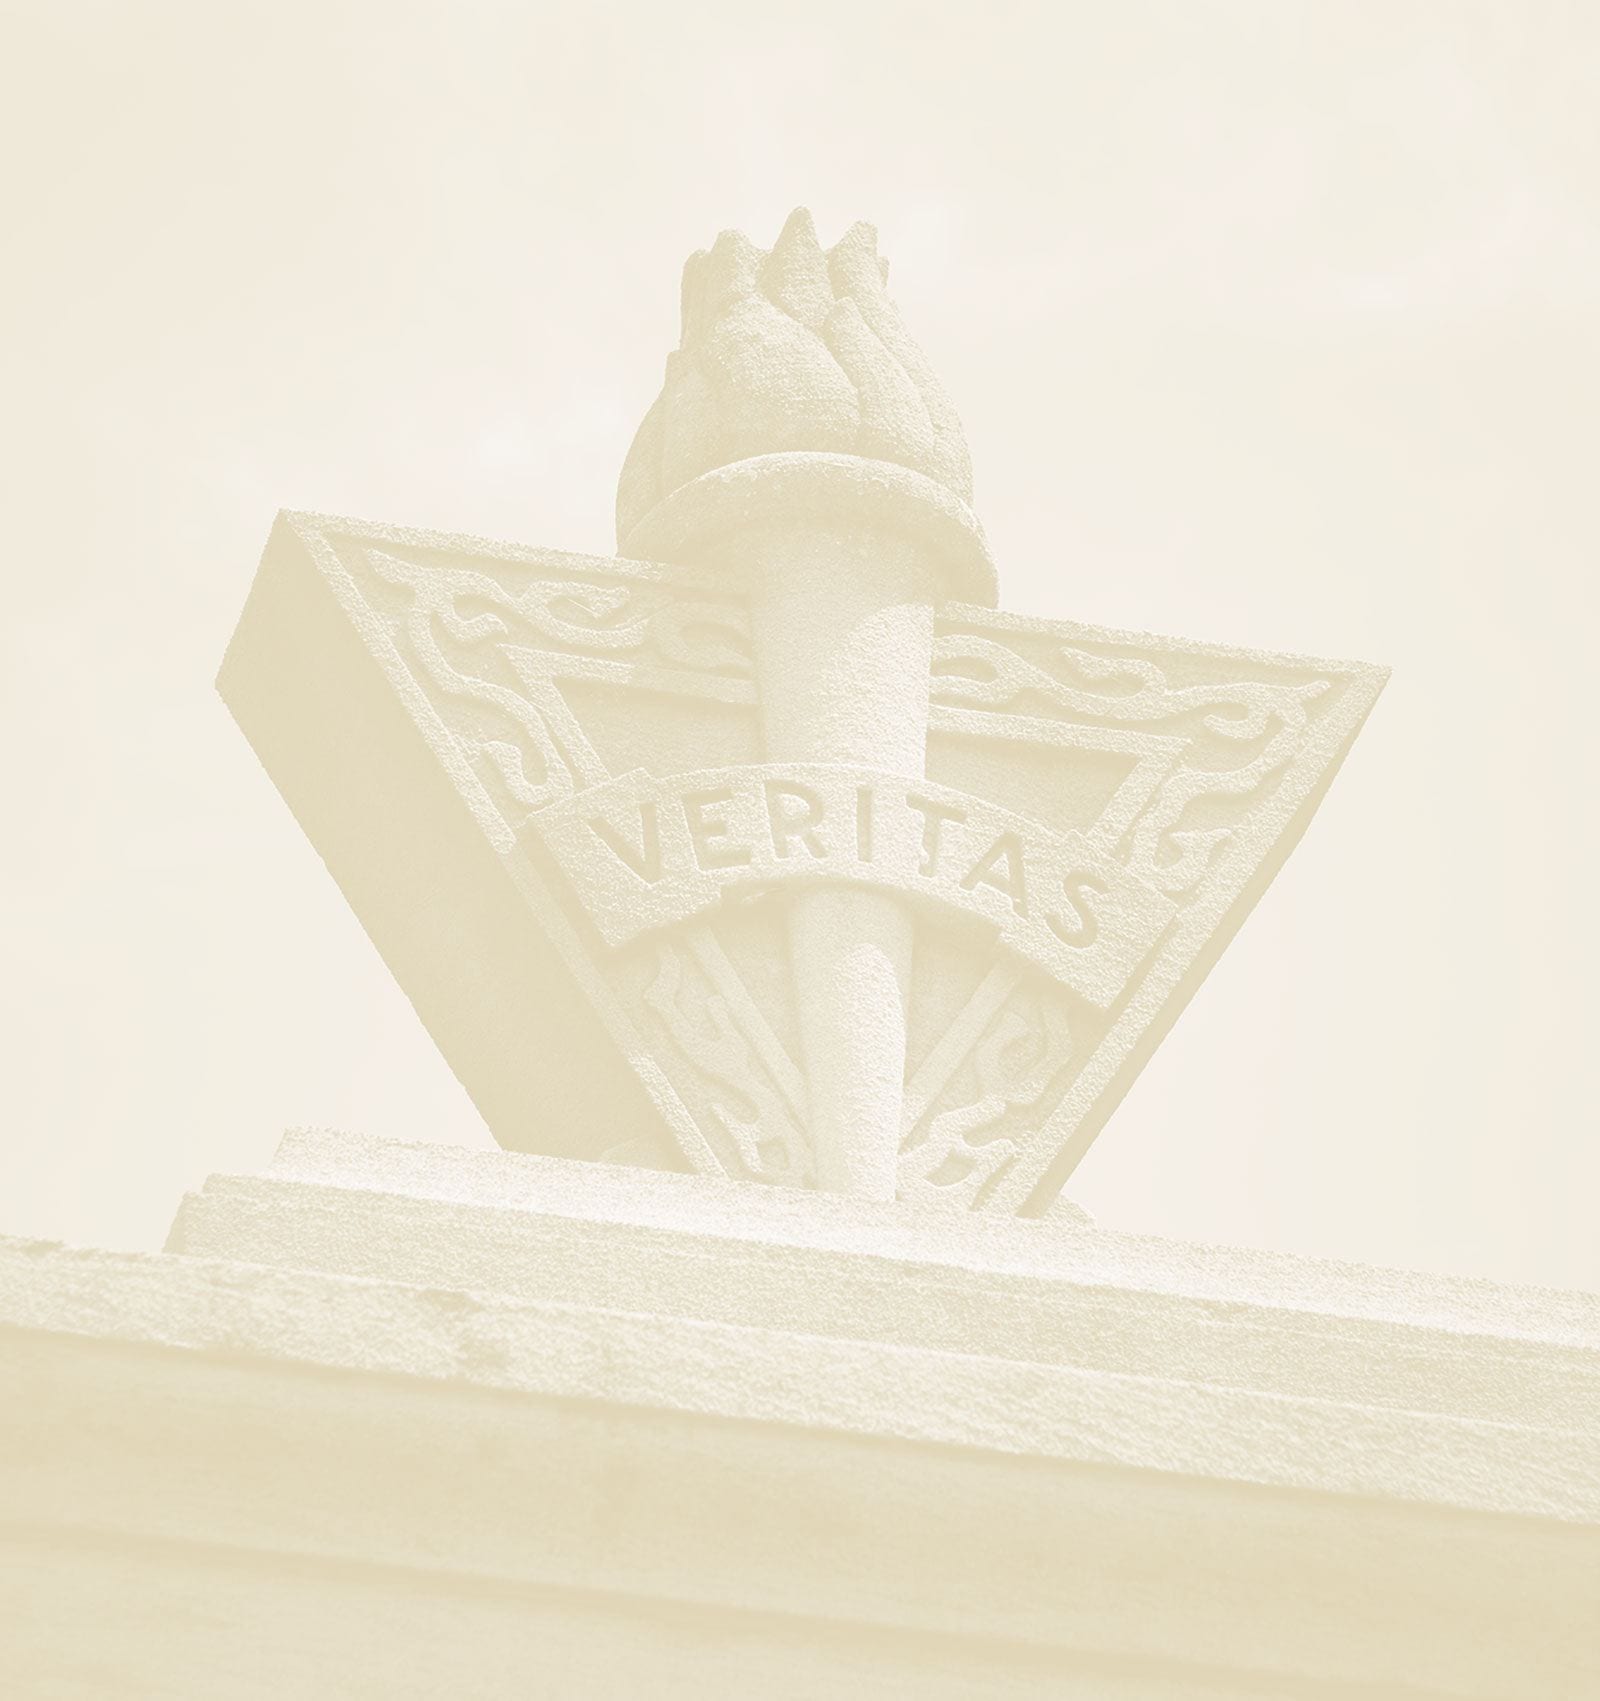 The Veritas logo- a torch of knowledge with the word Veritas over it